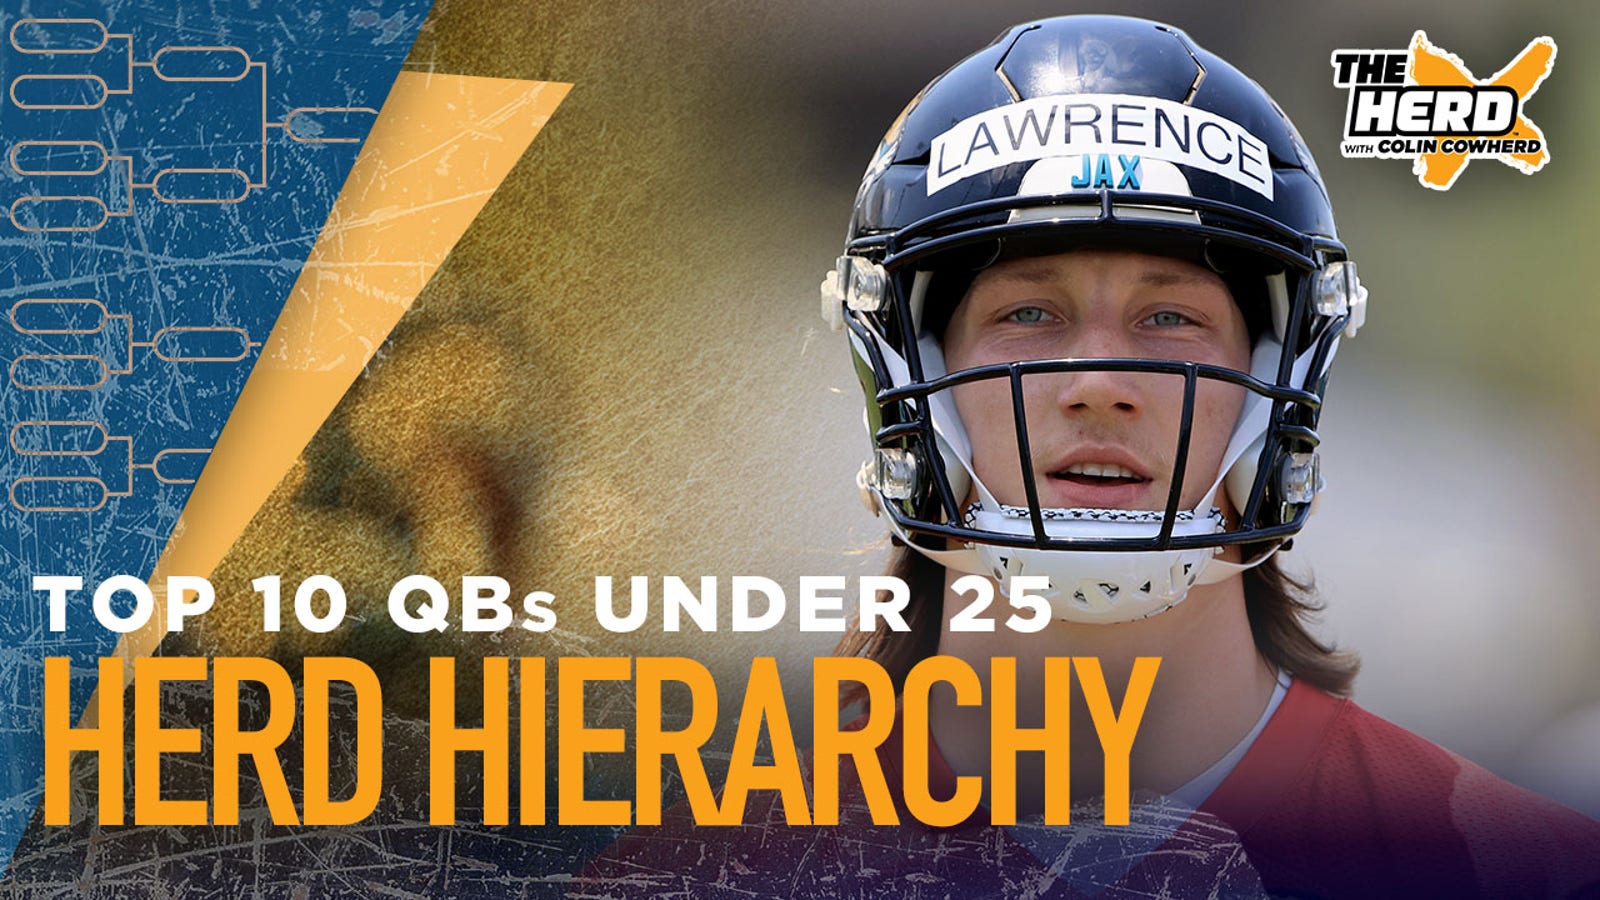 Herd Hierarchy: Colin Cowherd ranks the top 10 QBs under the age of 25 | THE HERD